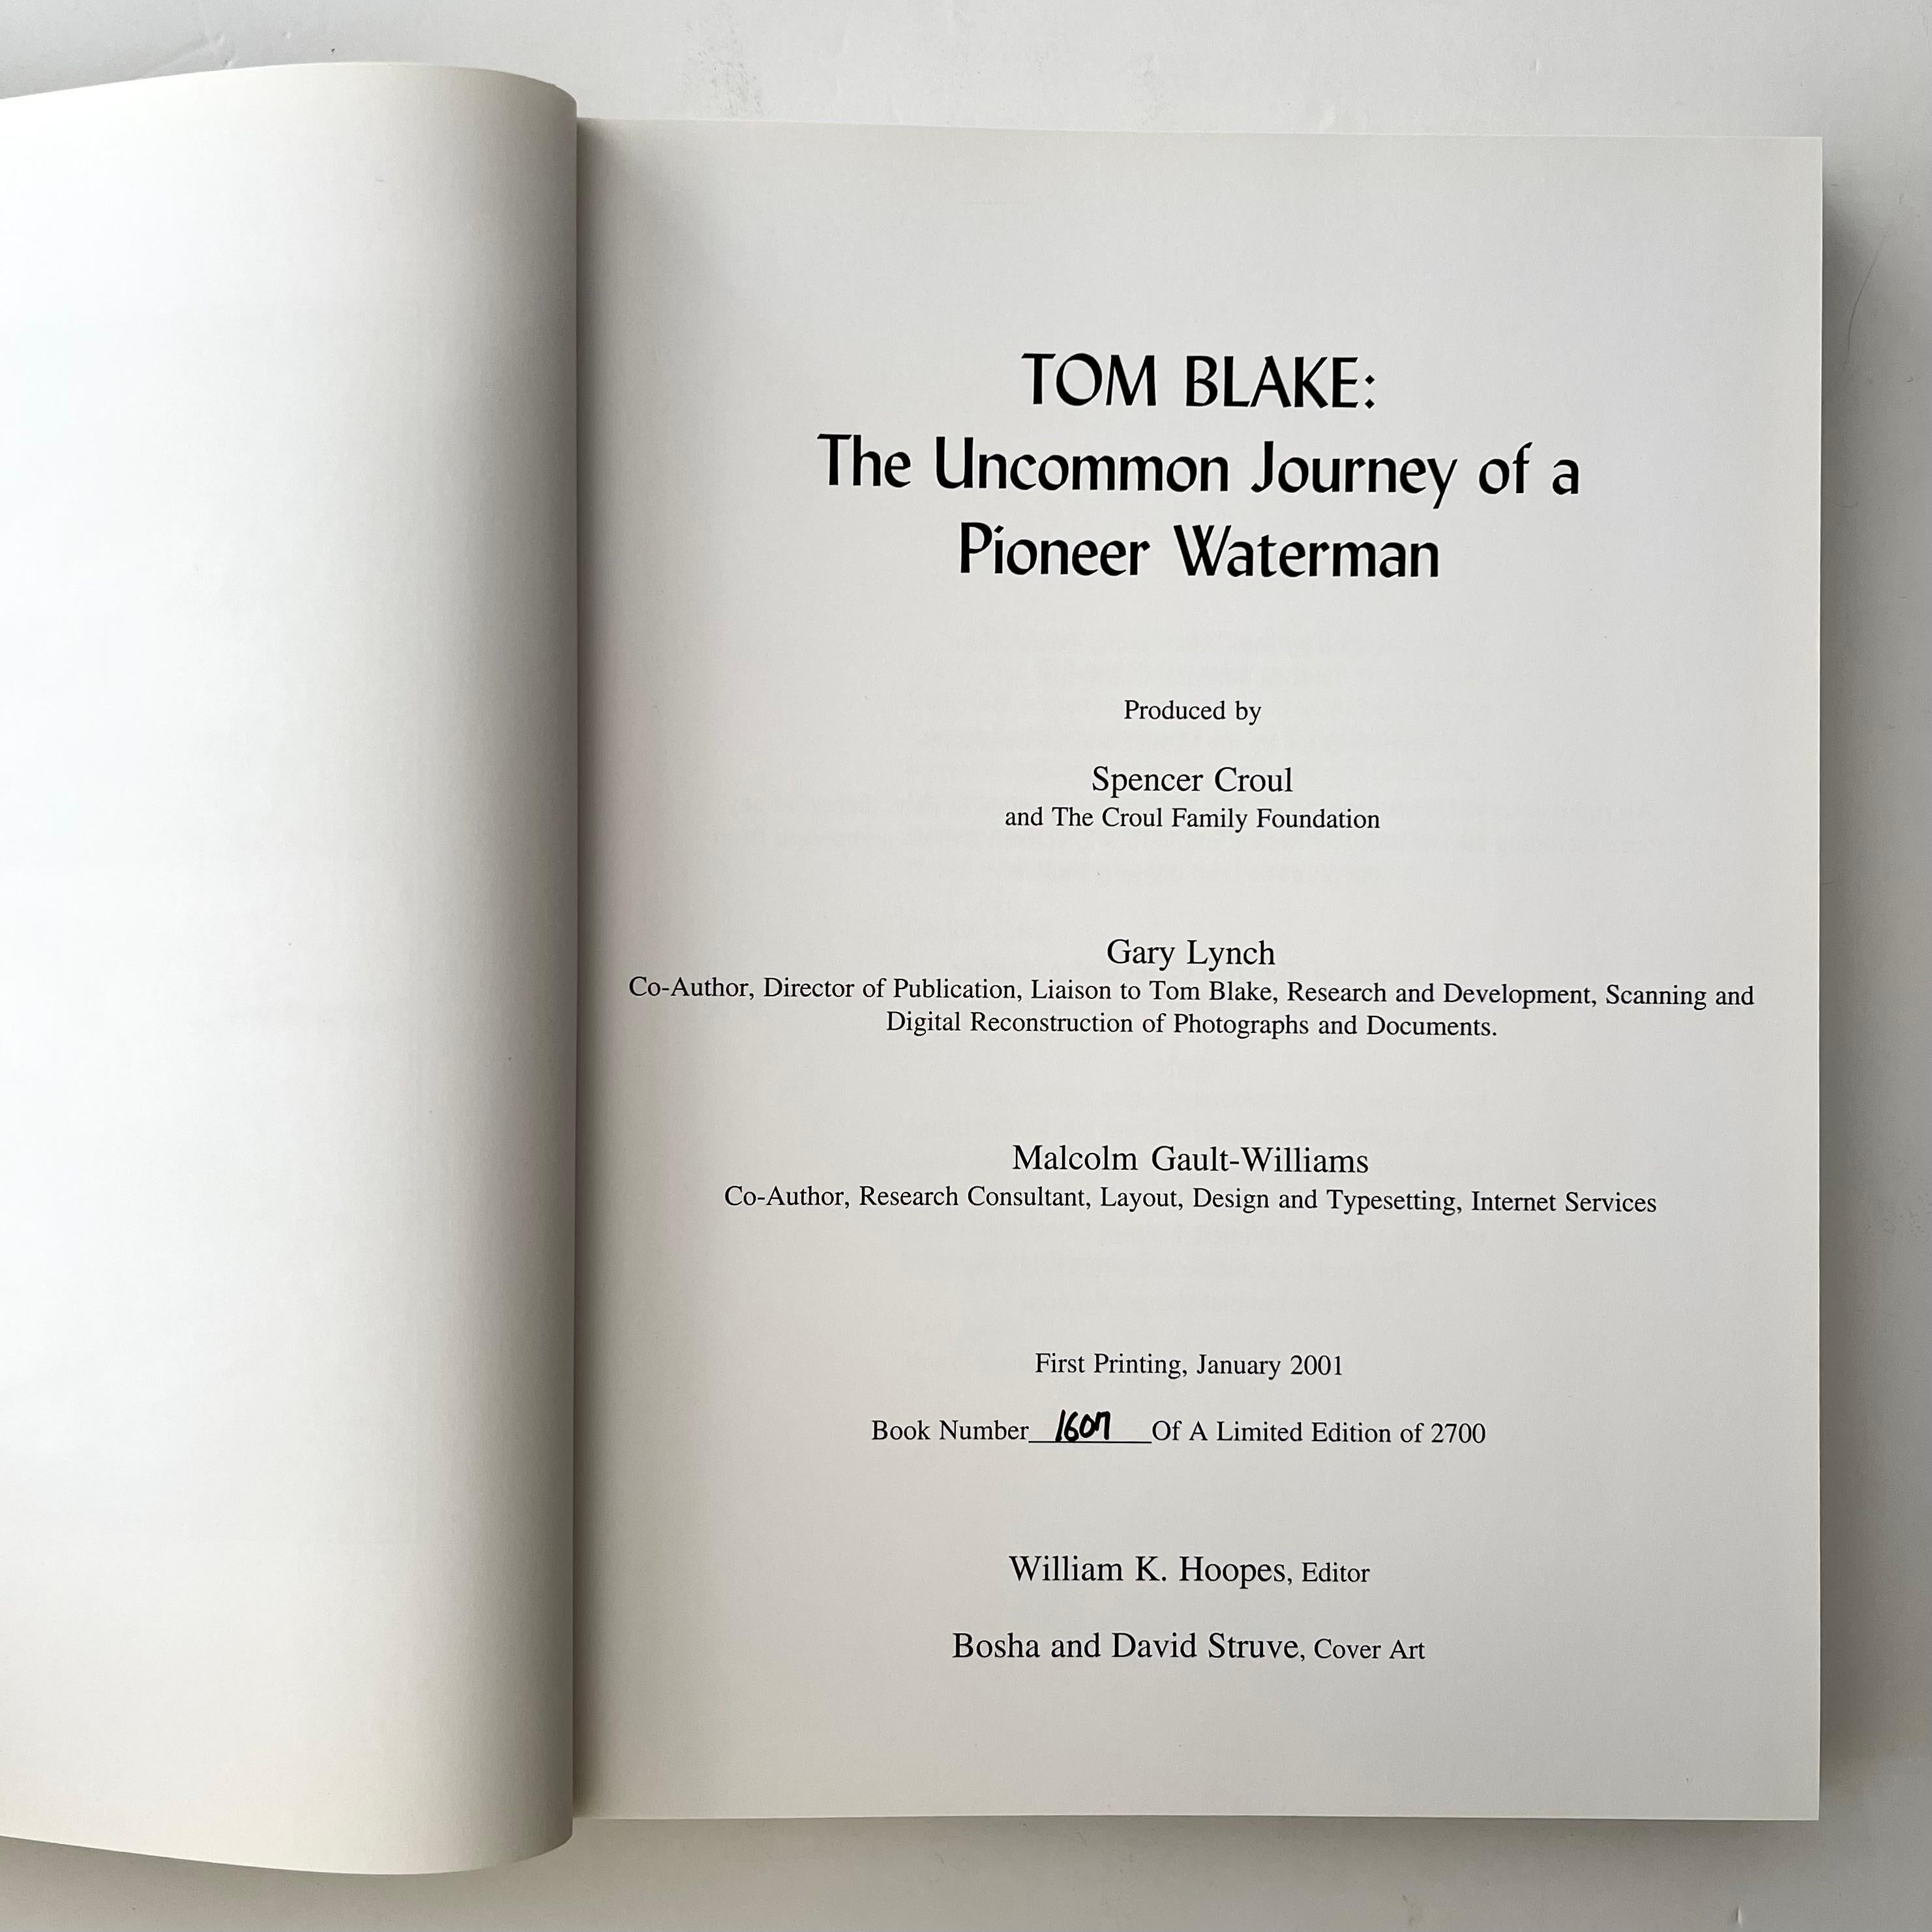 Published by Croul Family Foundation, Corona del Mar, California, 2001 limited edition no. 1067 in original box
Spencer B. Croul and co-authored by Gary Lynch and Malcolm Gault-Williams

This very scarce book is the definitive biography of Tom Blake